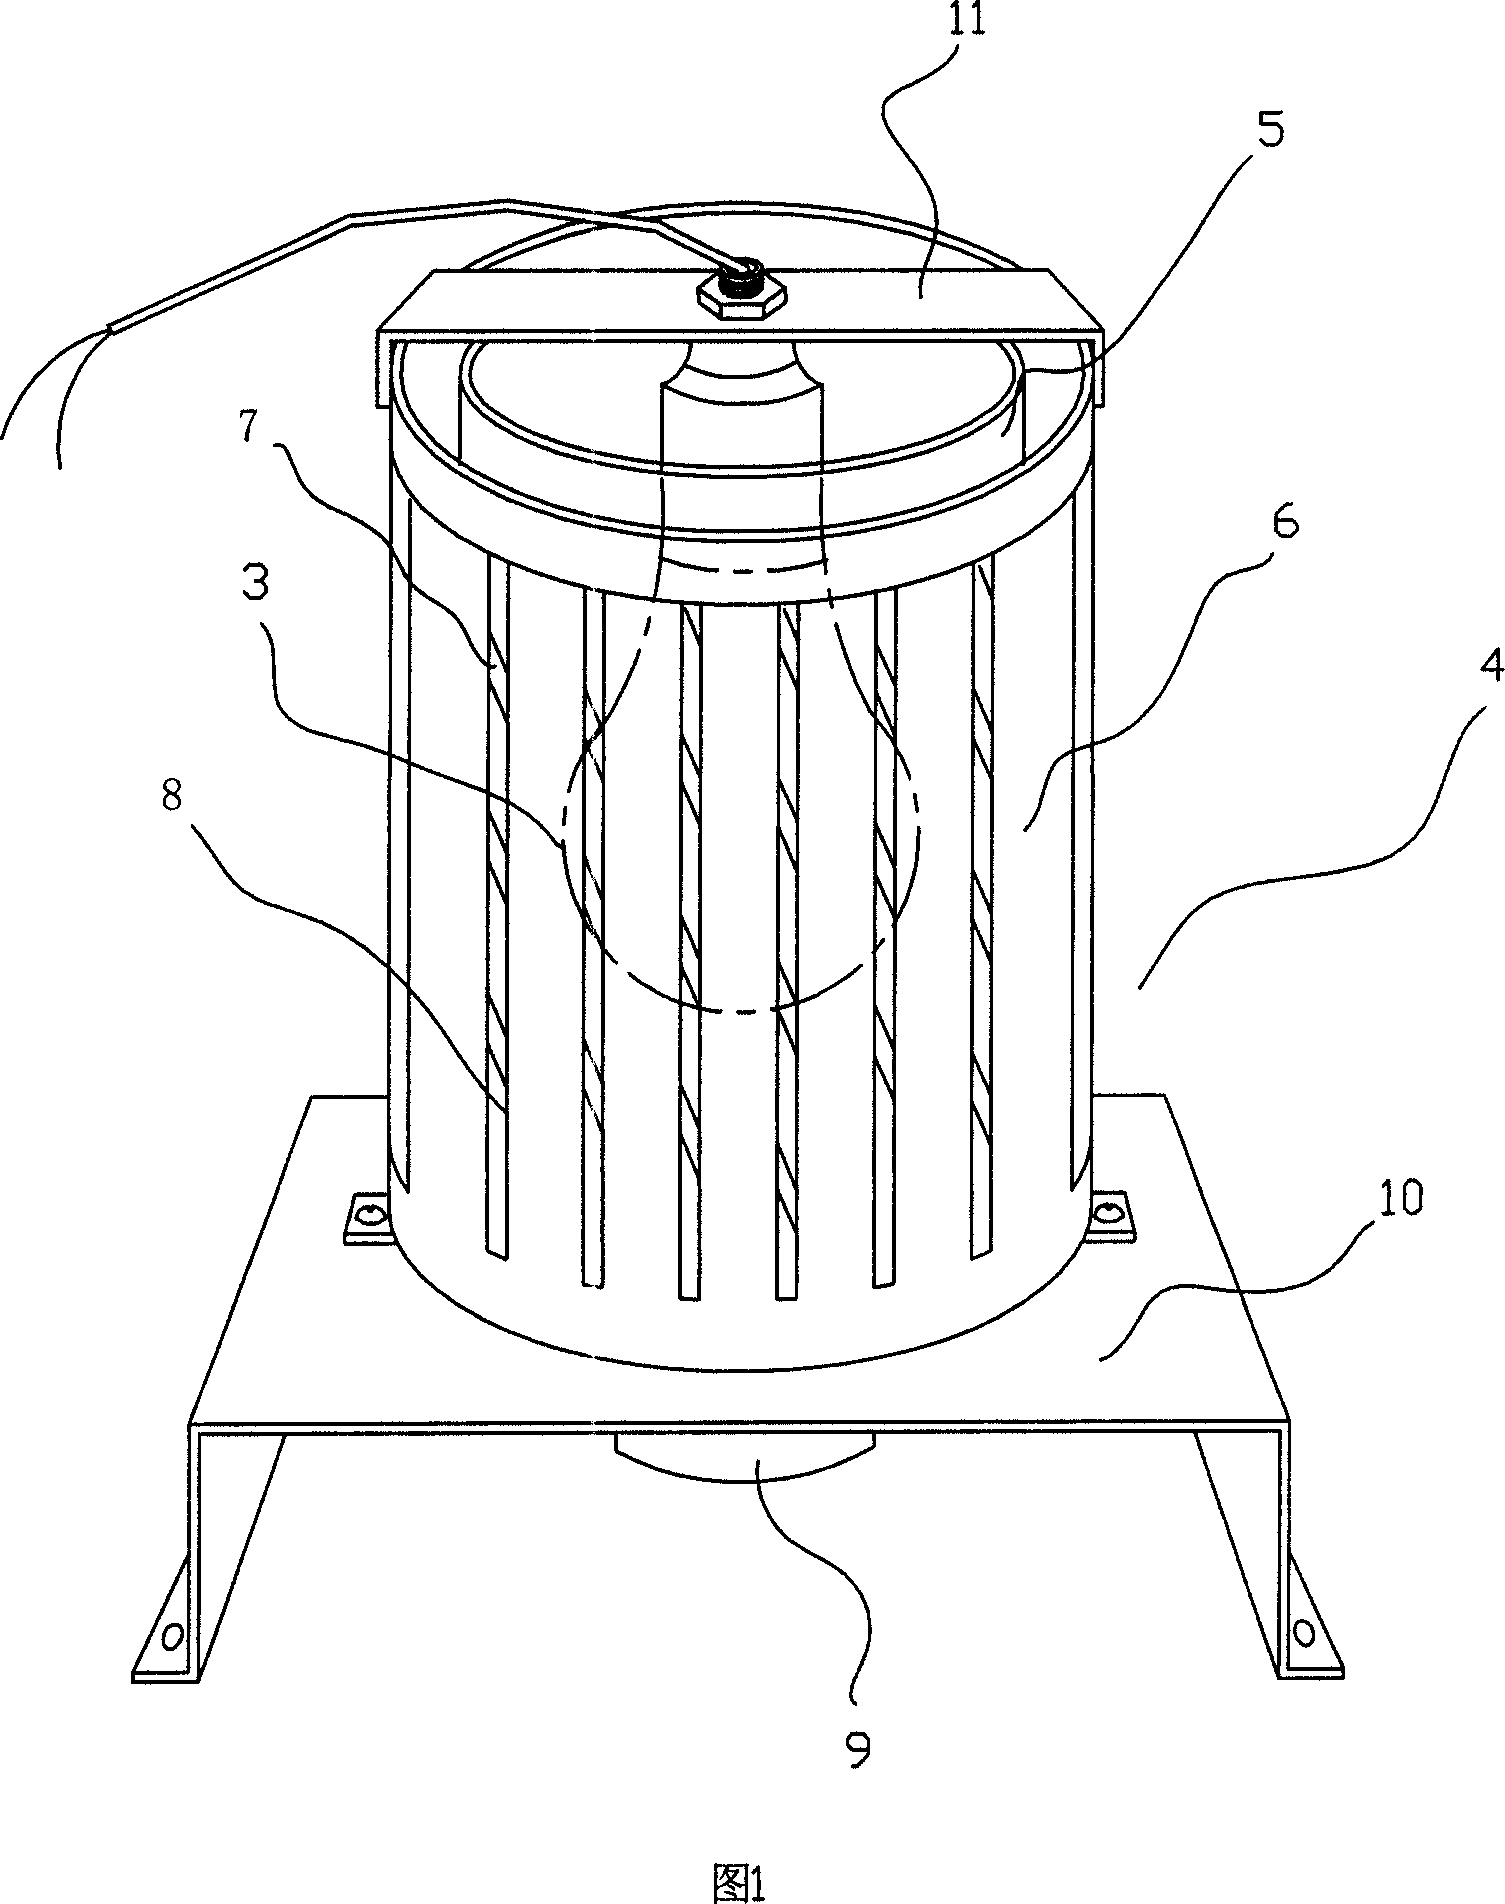 Artificial device for simulating flame burning image